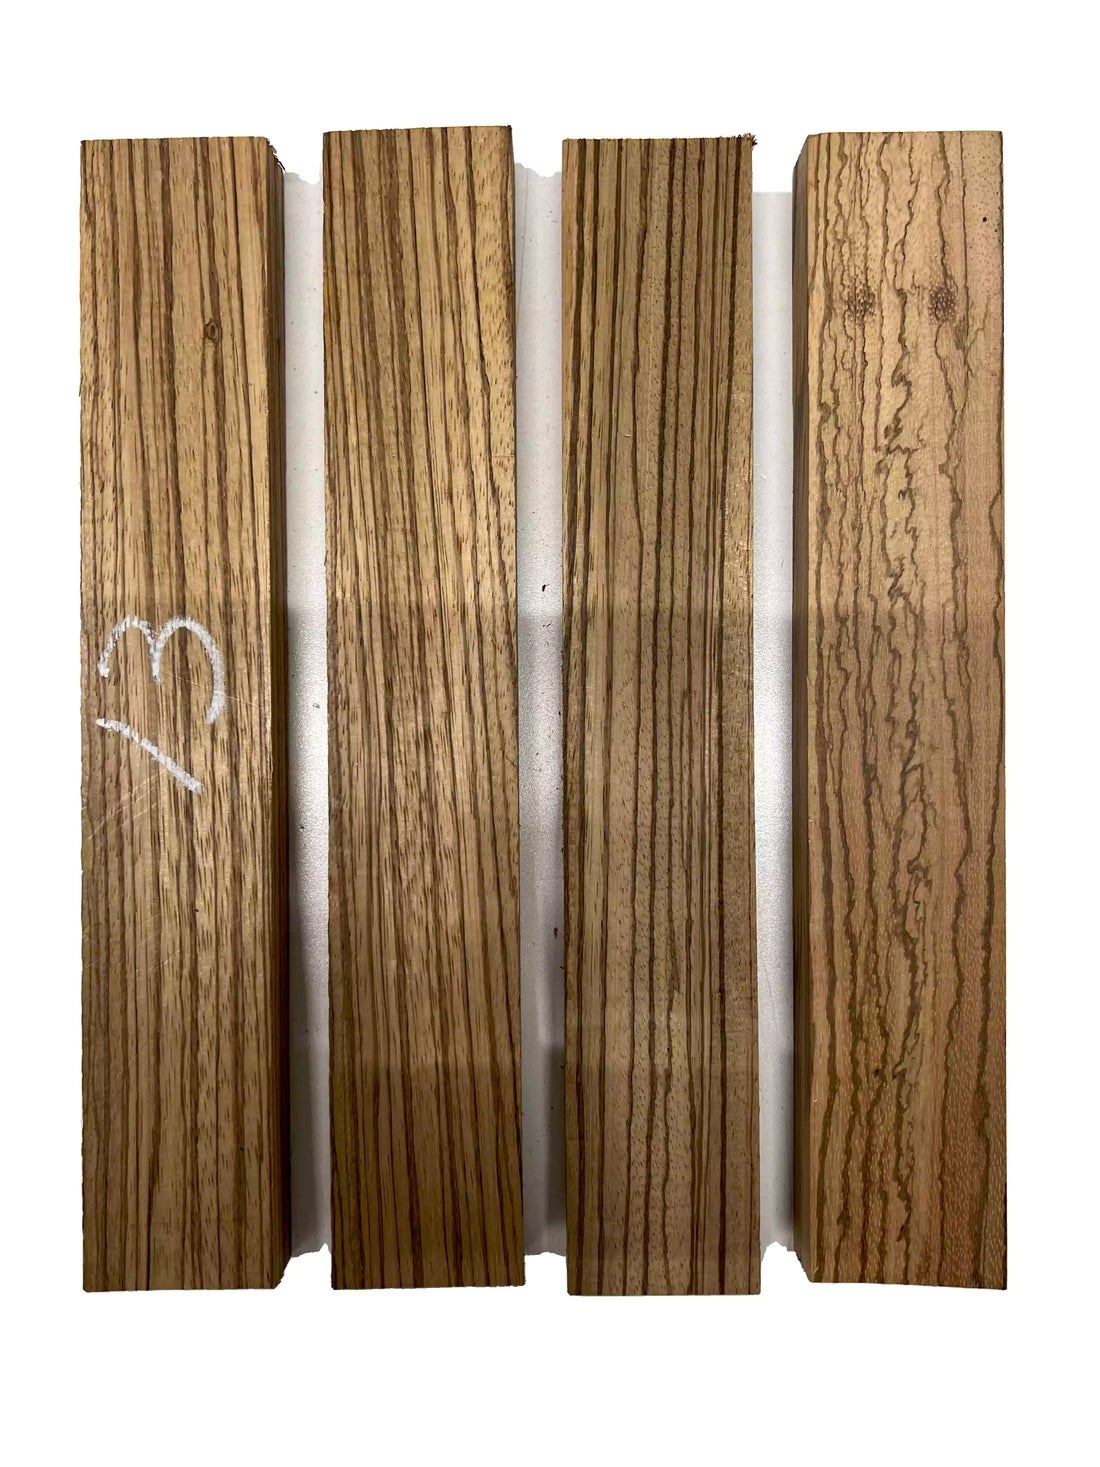 Pack of 4, Zebrawood Thin Stock Three Dimensional Lumber Board 12&quot; x 2&quot; x 3/4&quot; 